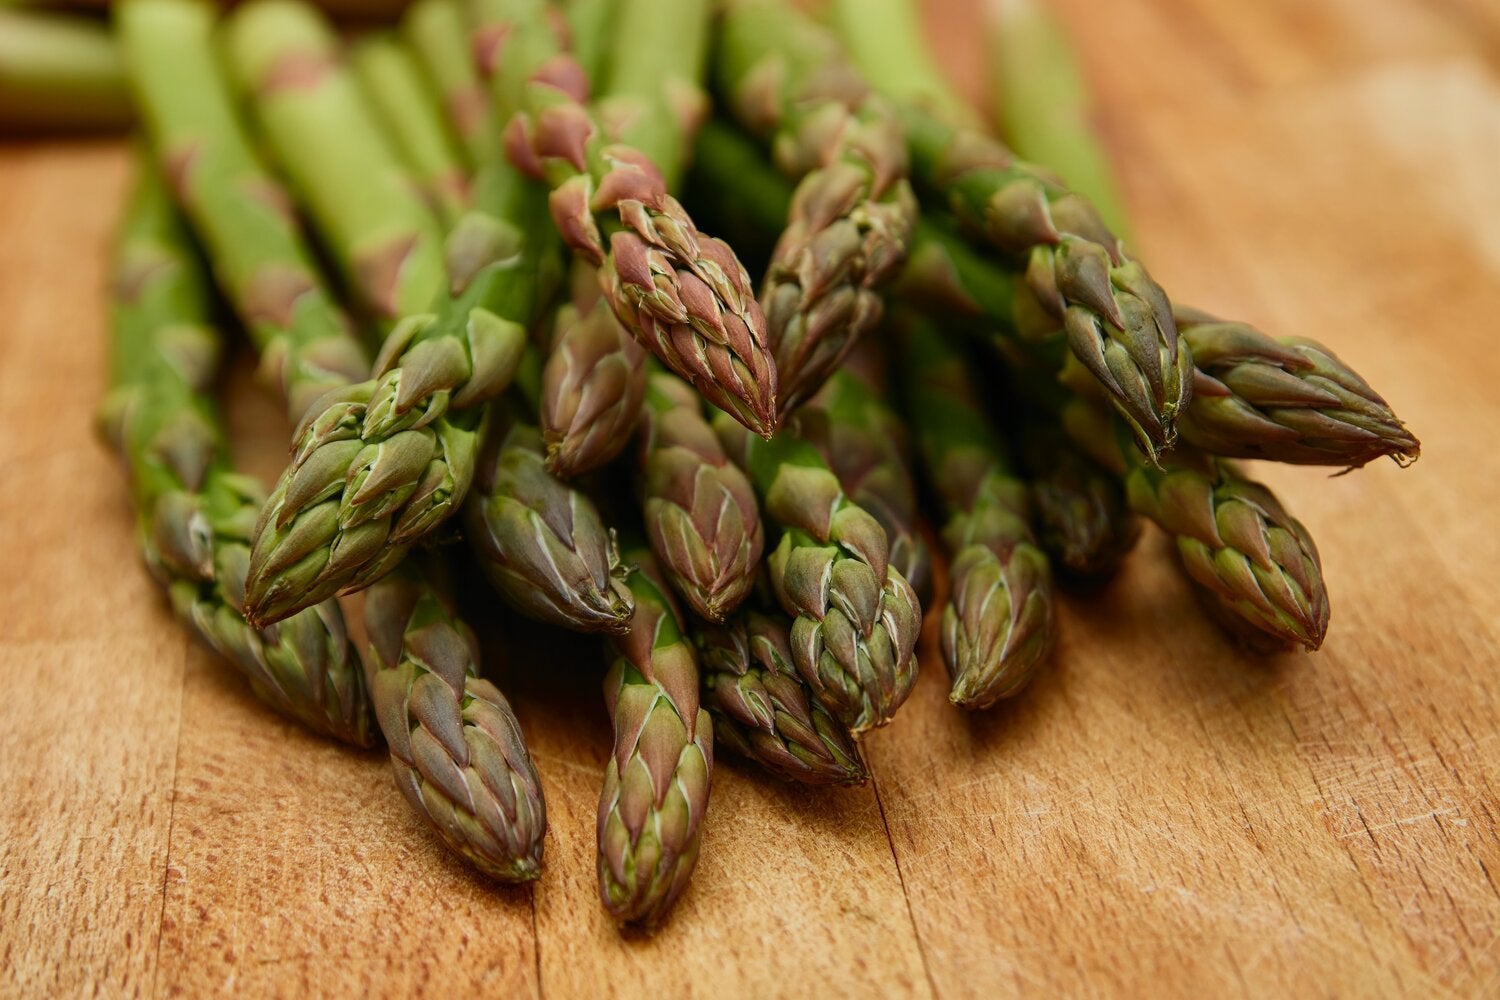 Smoking Weed Can Mask The Scent Of Asparagus Pee, Study Shows